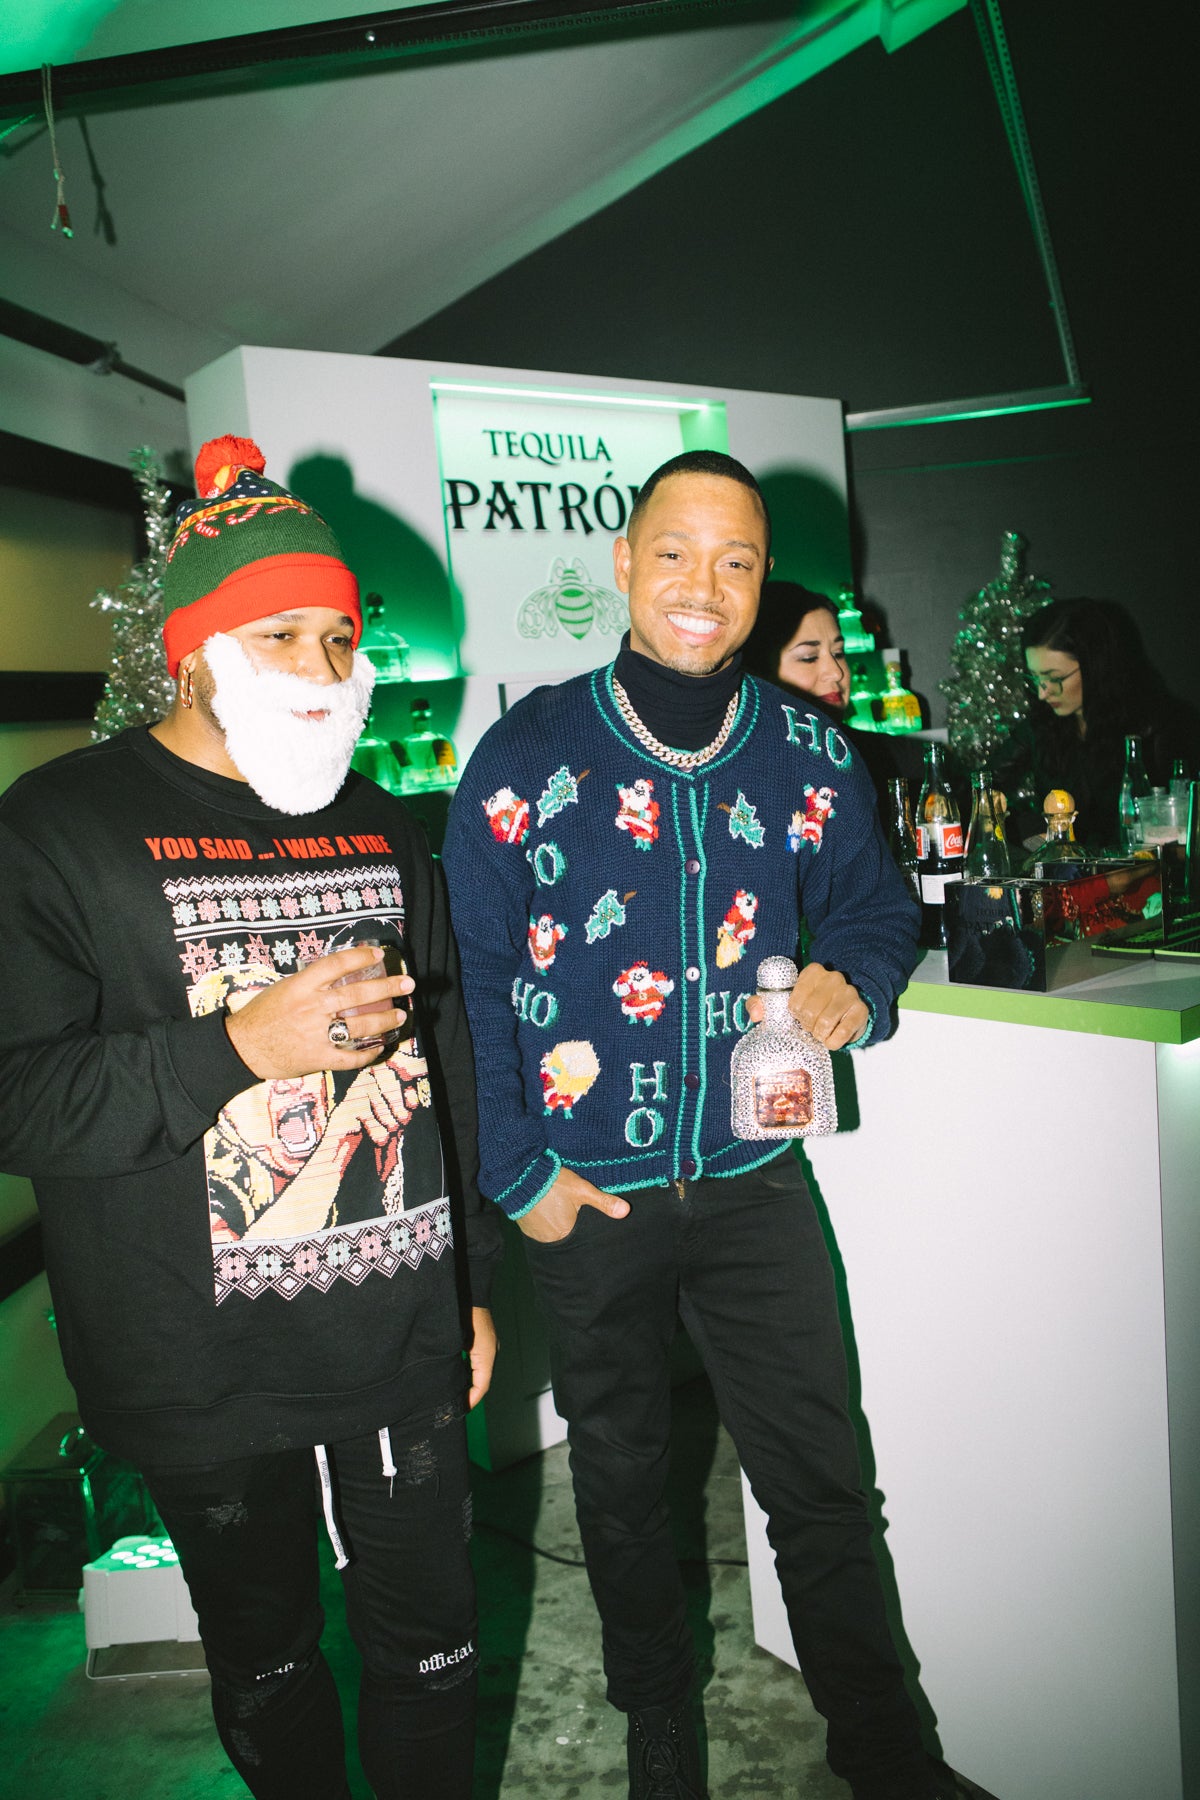 Terrence J Threw An Epic Ugly Sweater Christmas Party, And We're Mad We Weren't Invited